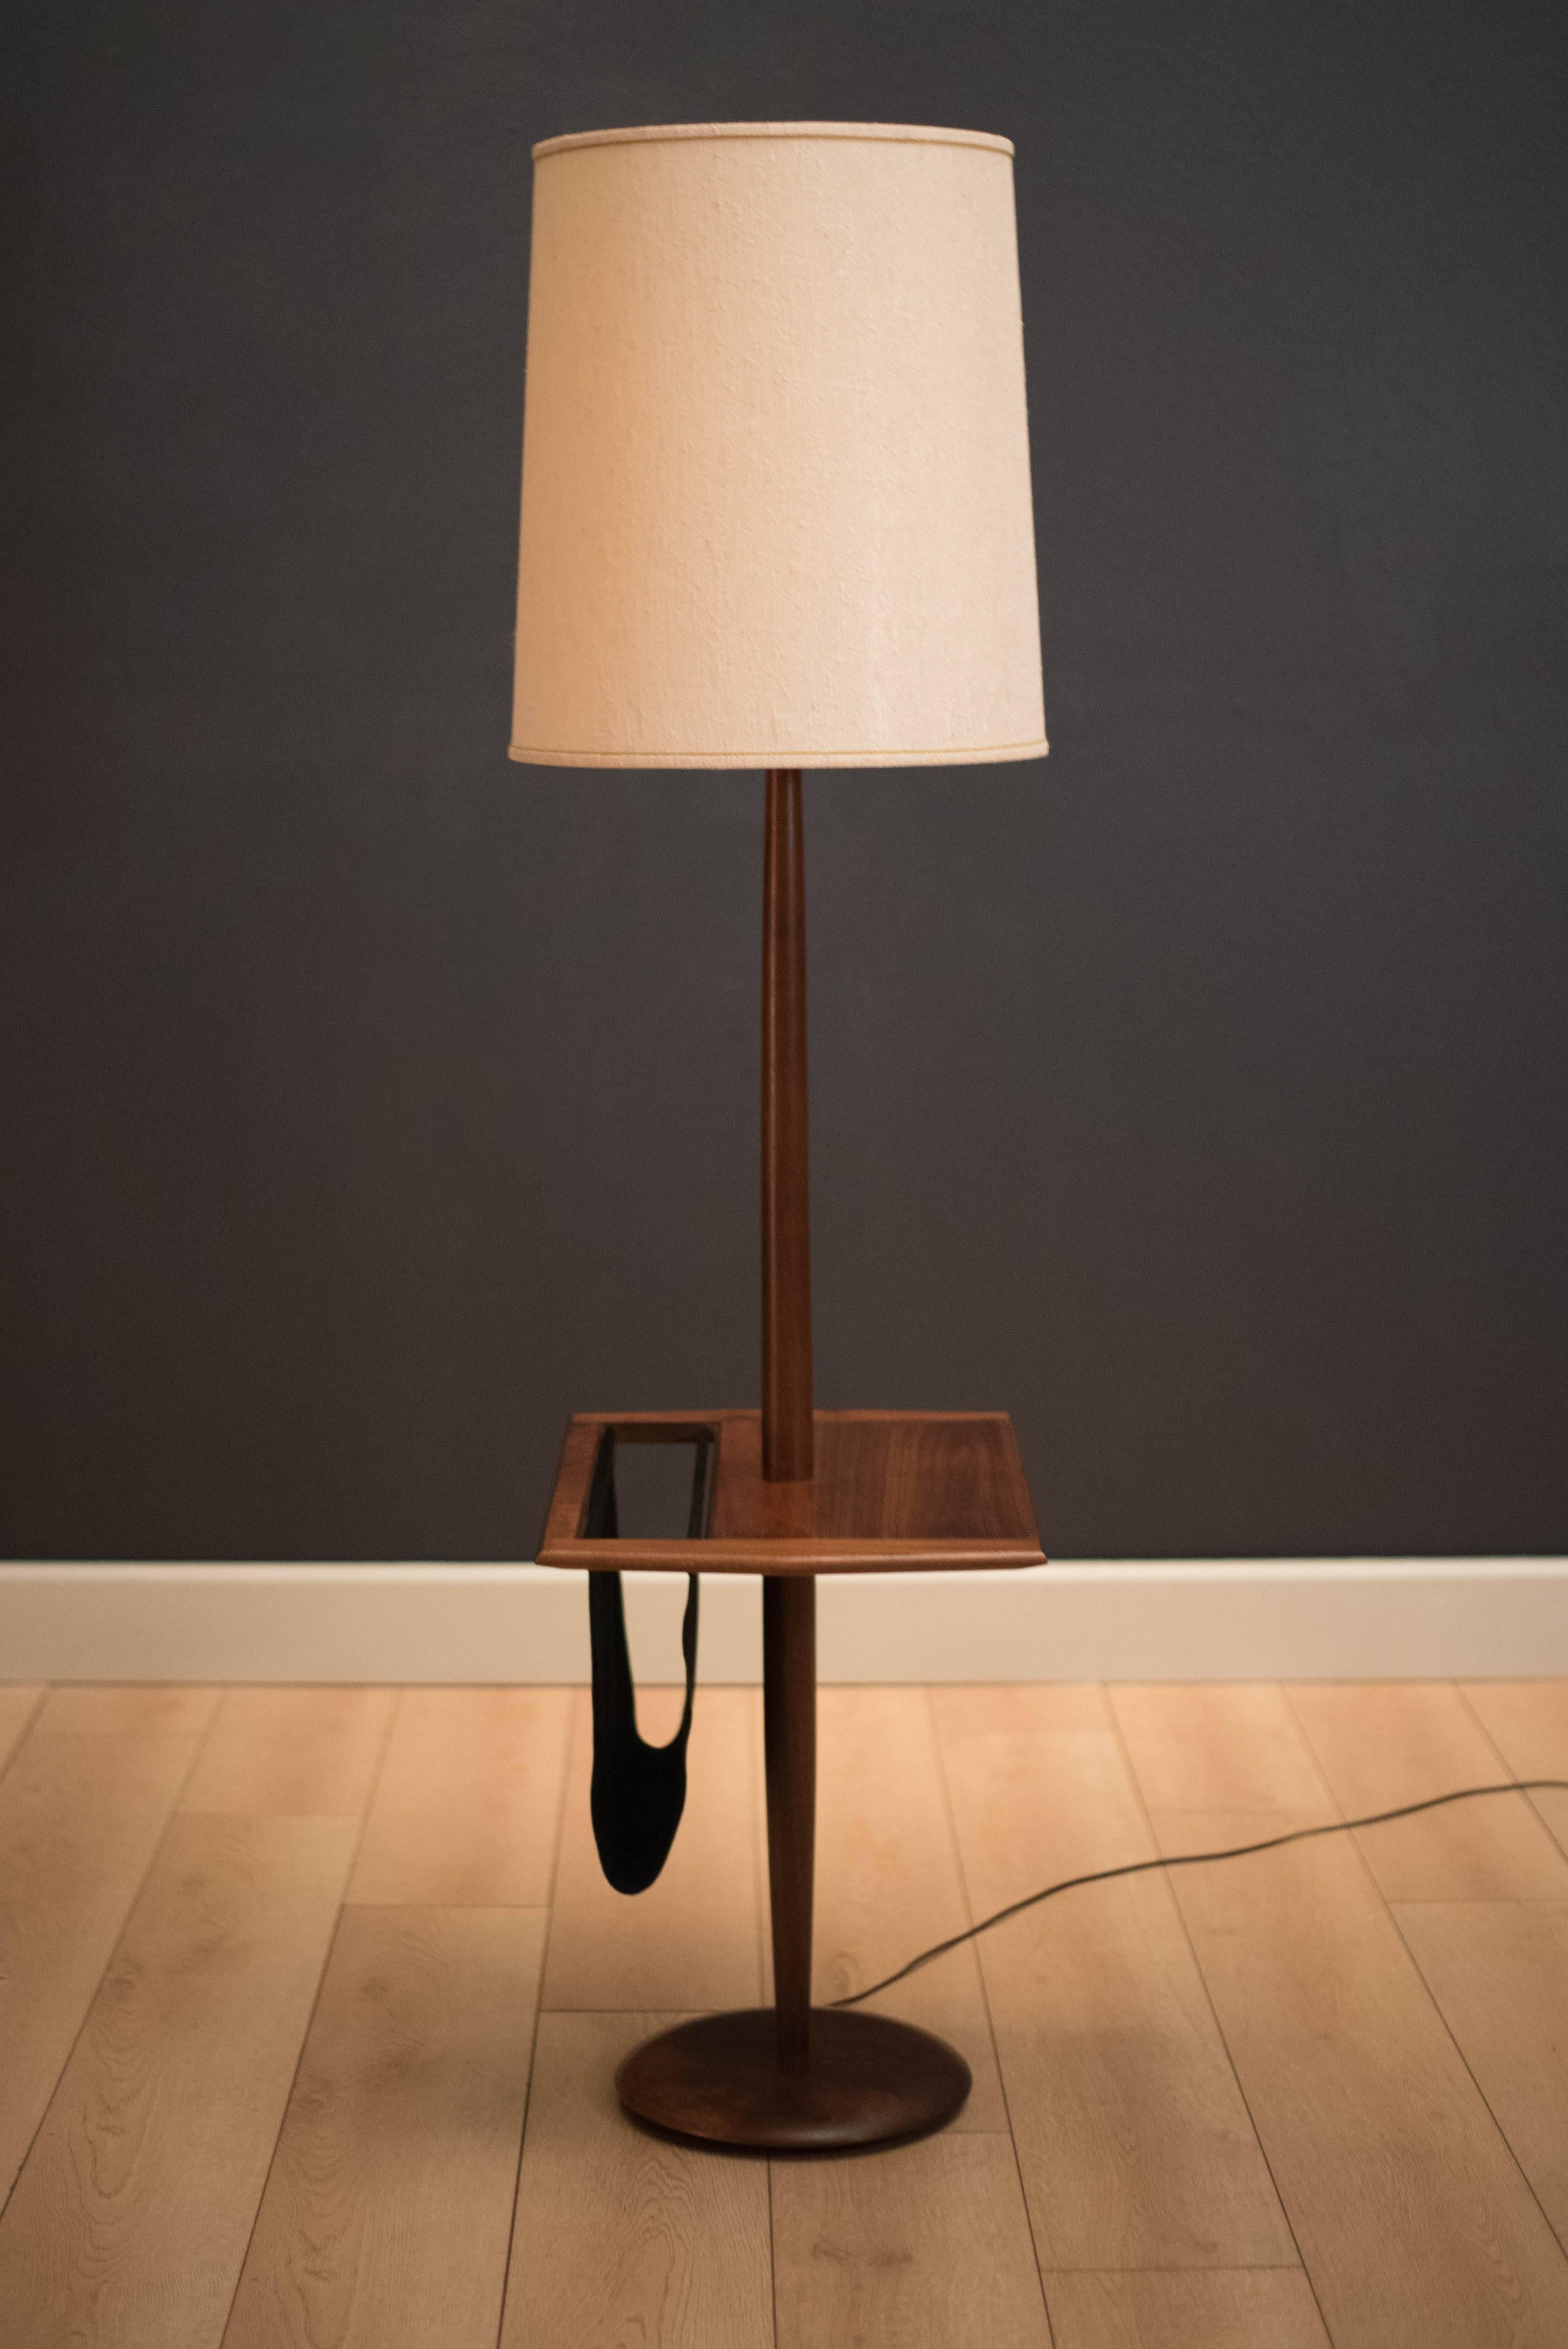 Vintage laurel floor lamp in walnut with built in side table. This functional piece includes a suede leather magazine holder attached. Lamp has a three way switch mechanism. Shade is not included.